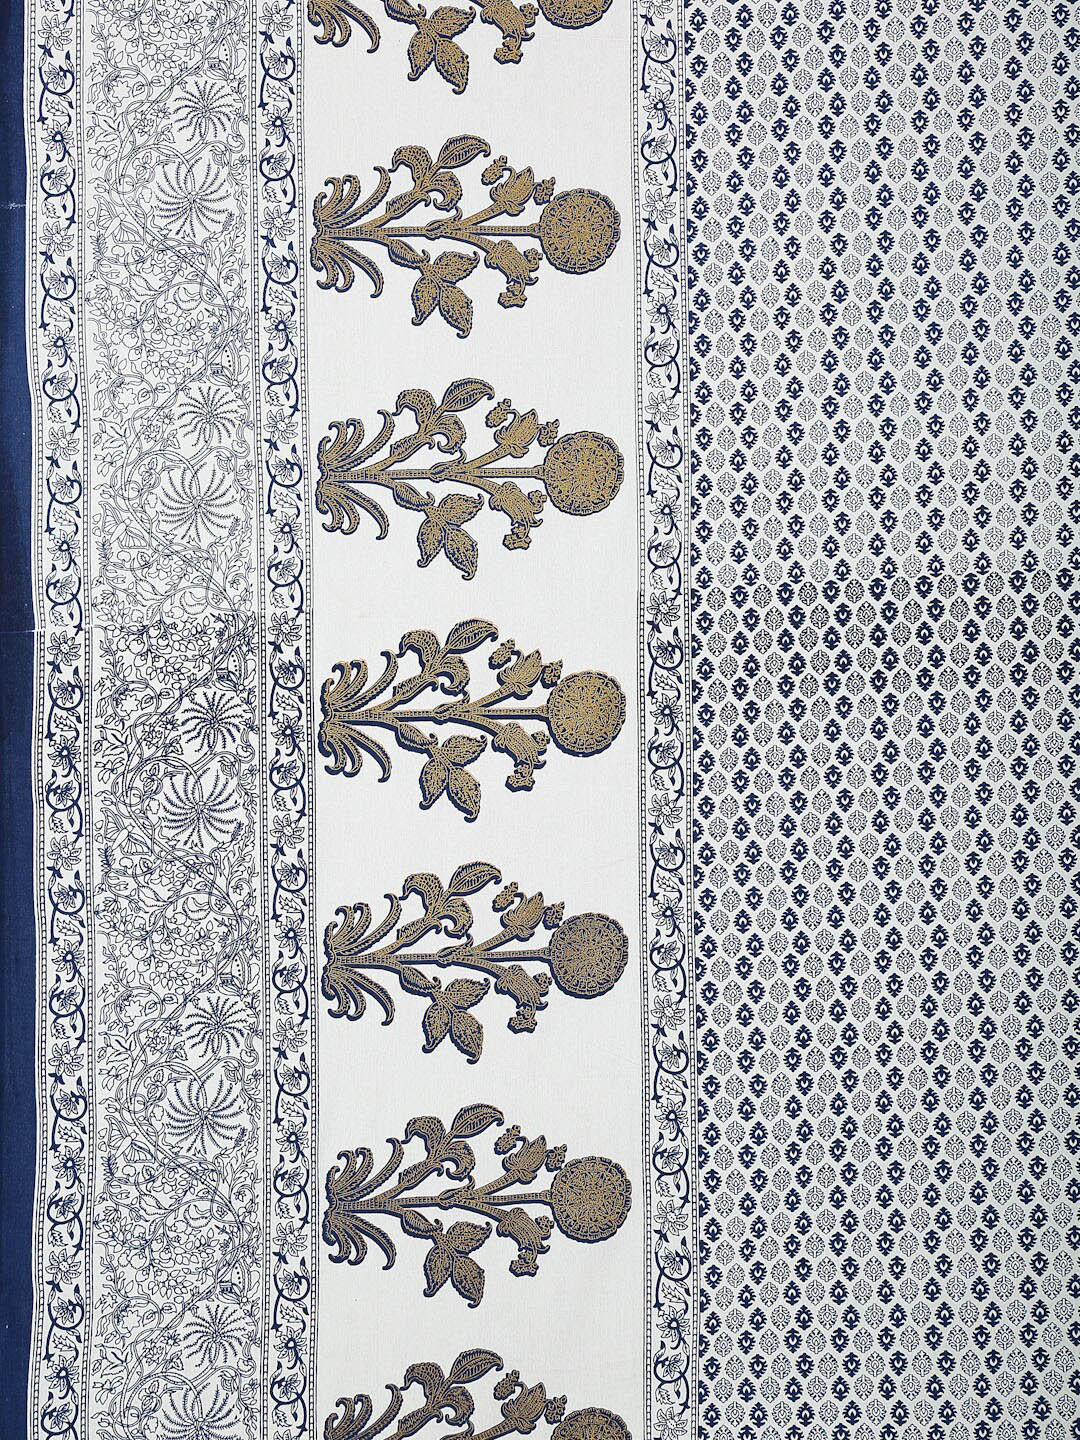 White & Blue Ethnic Motifs   Cotton 1 King Bedsheet with 2 Pillow Covers